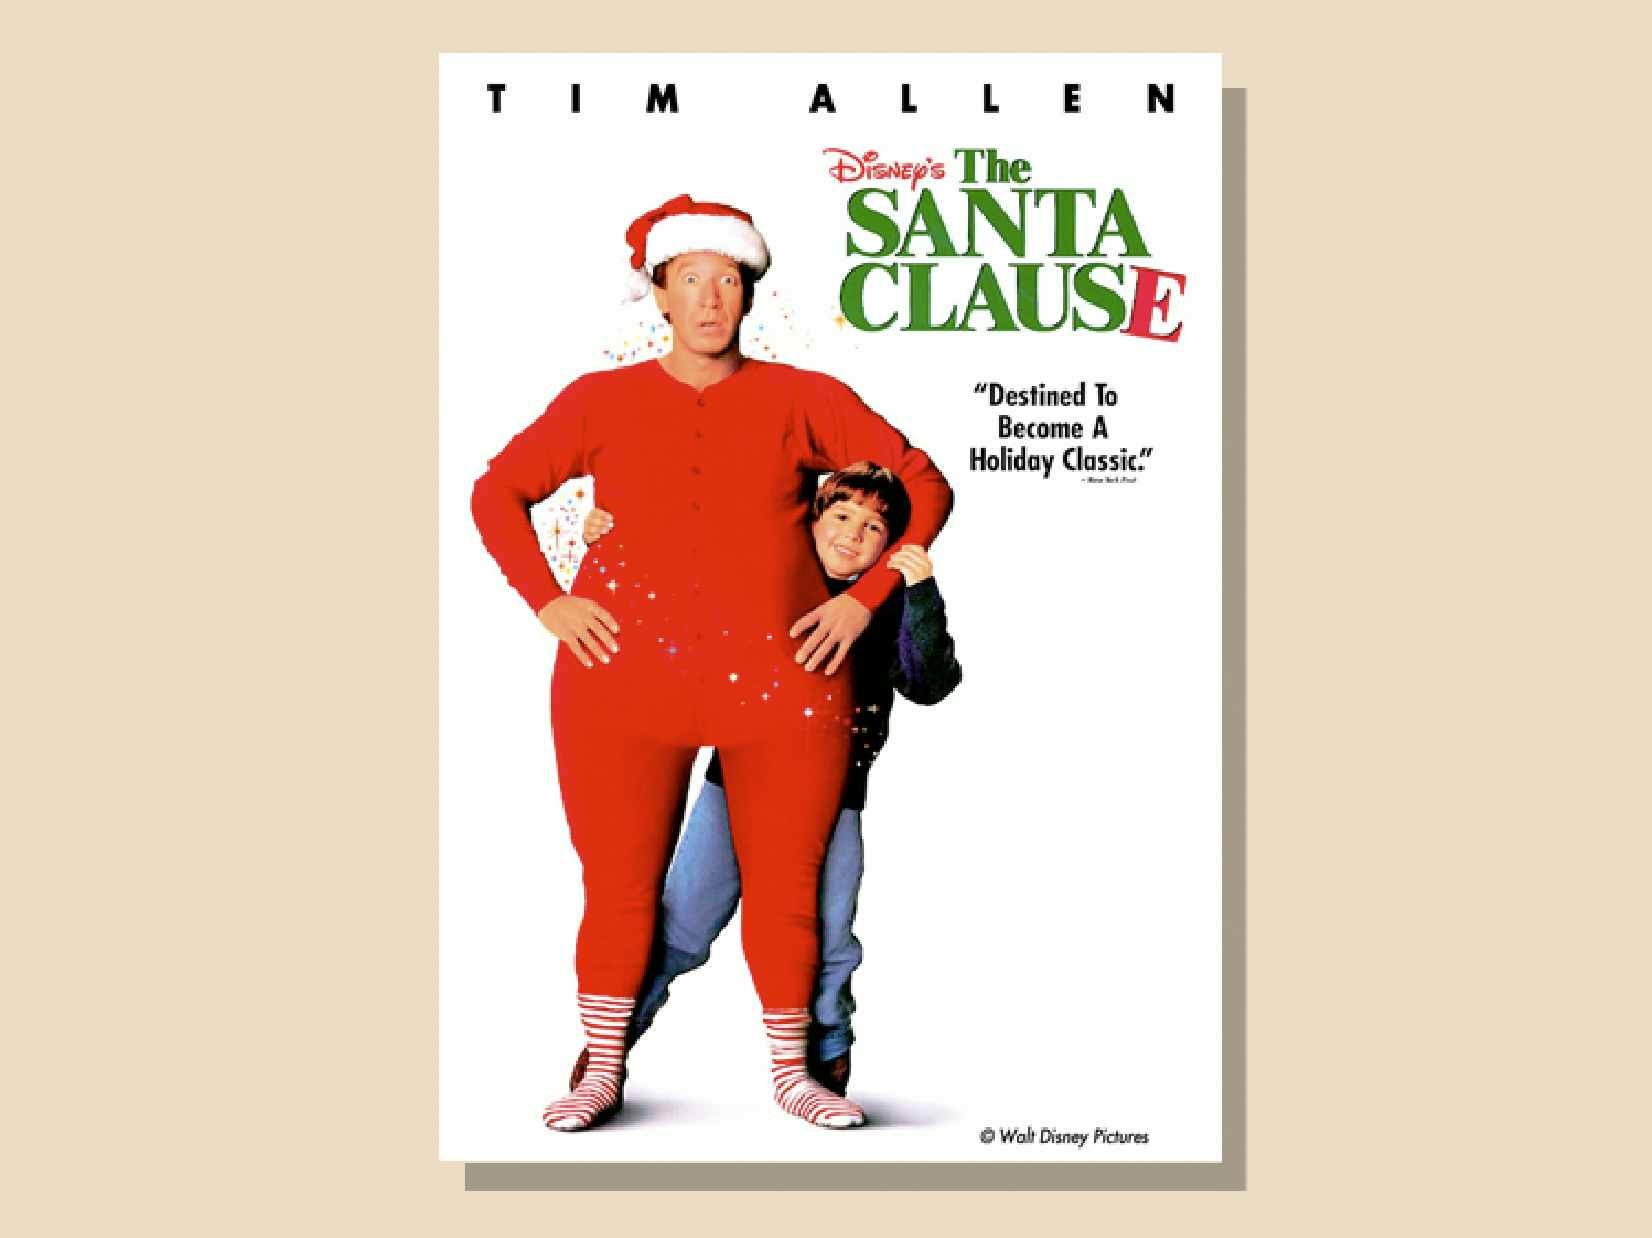 The Santa Clause, one of the best kids thanksgiving movies